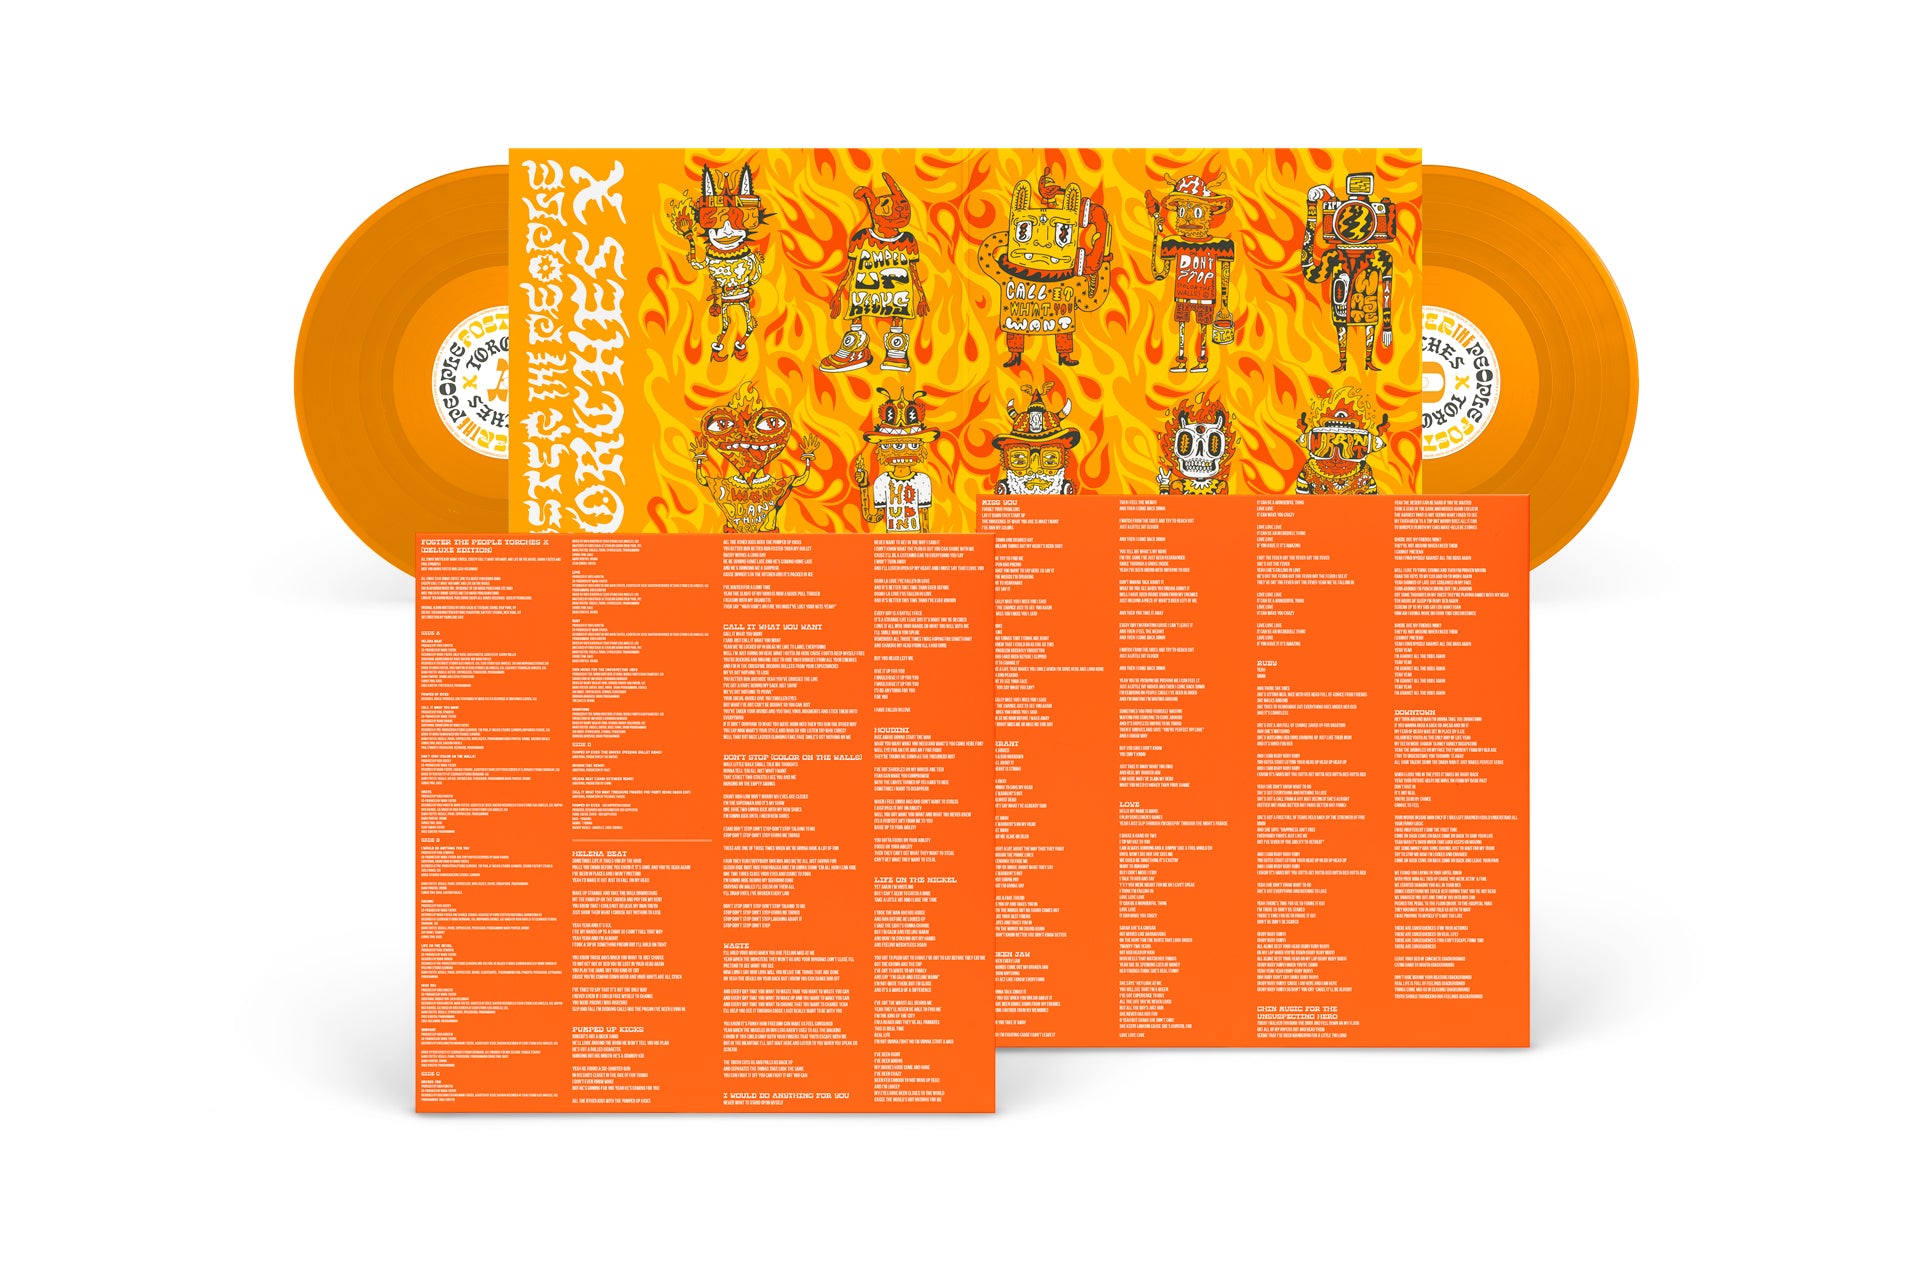 Torches X (Deluxe Edition) Vinyl